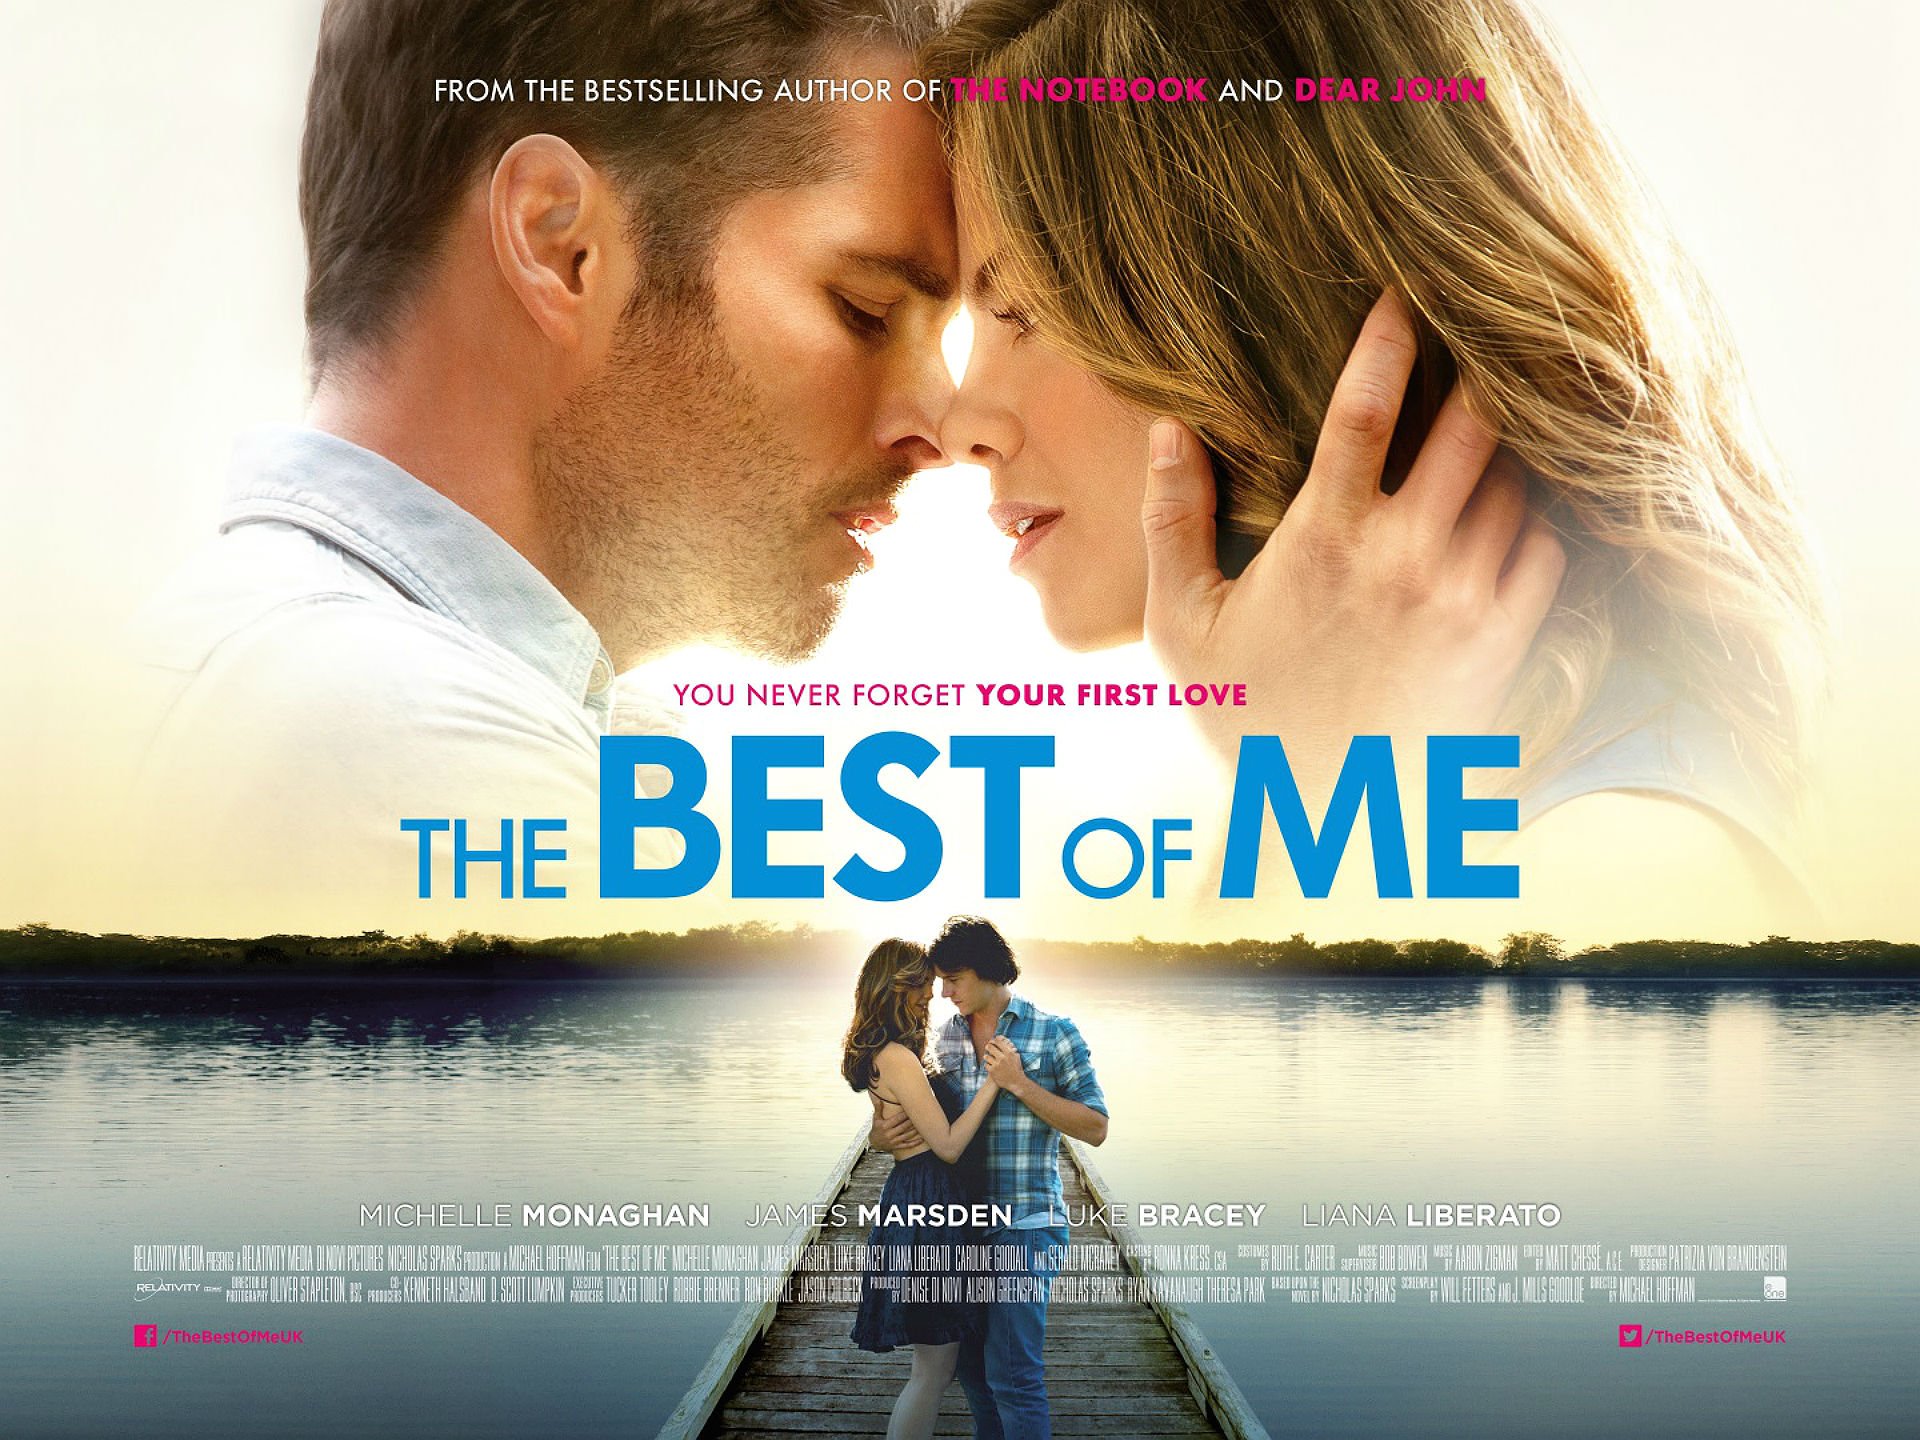 the, Best, Of, Me, Drama, Romance, Mood, Best of me Wallpaper